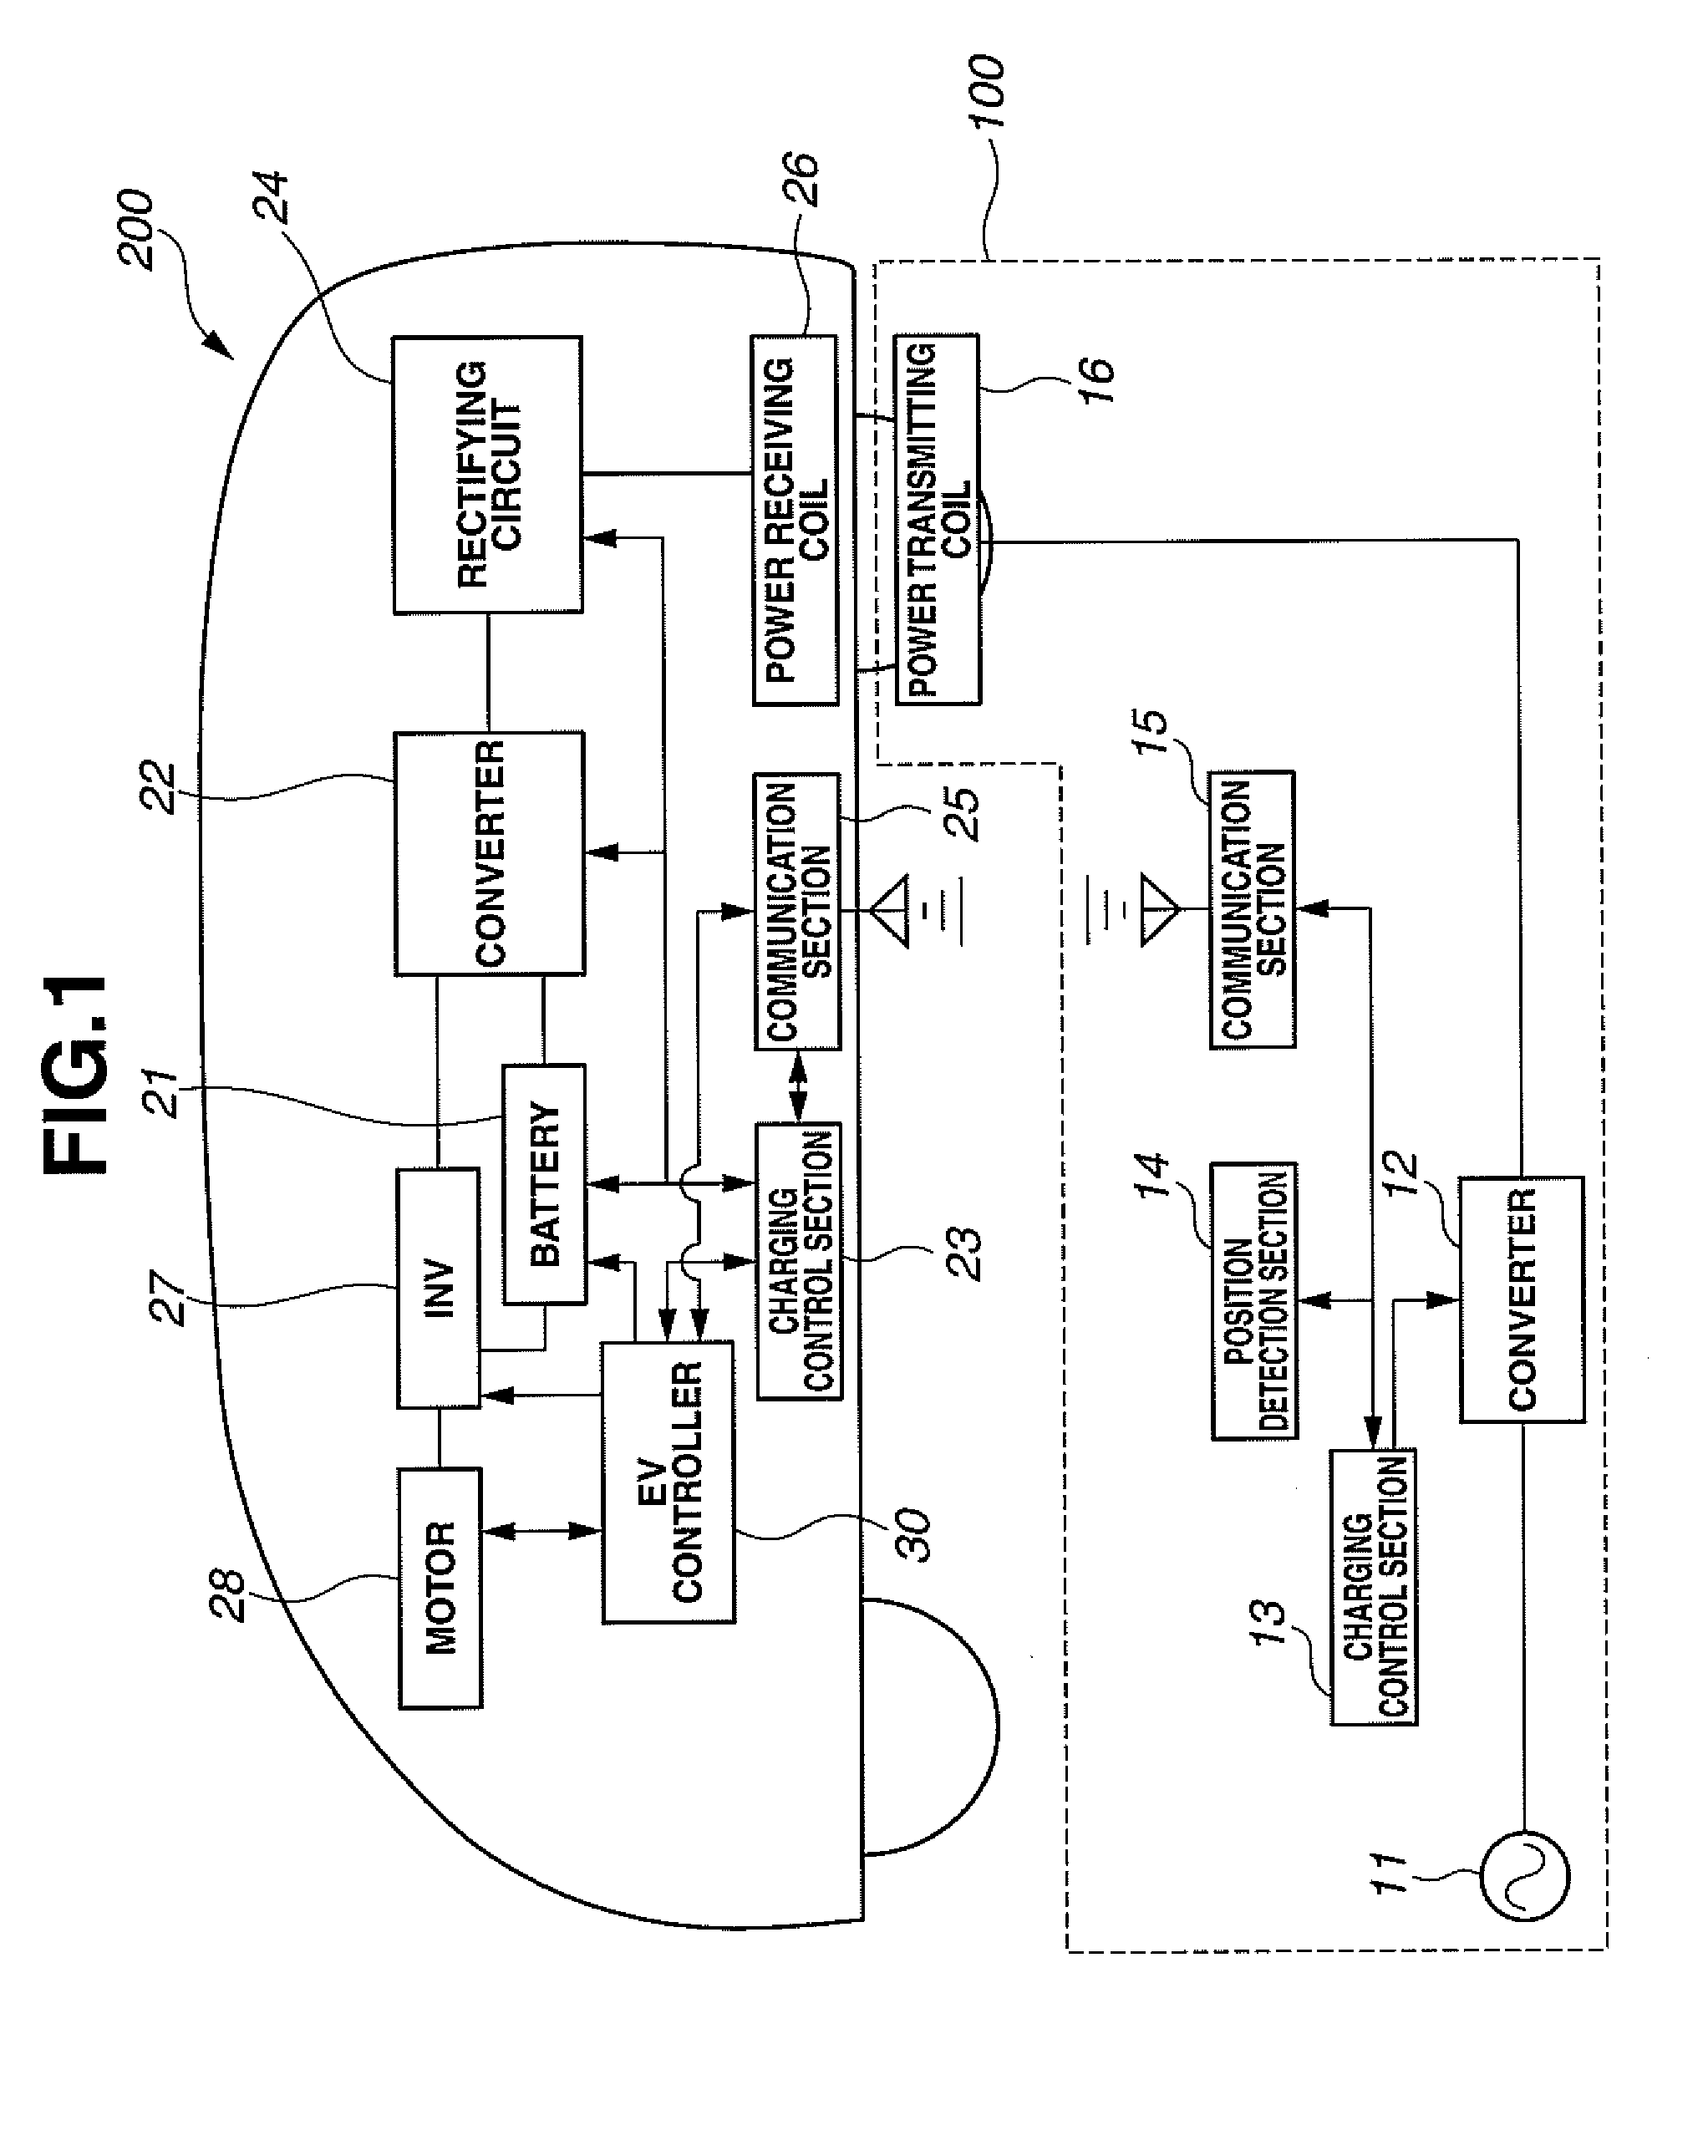 Torque control apparatus and contactless charging system